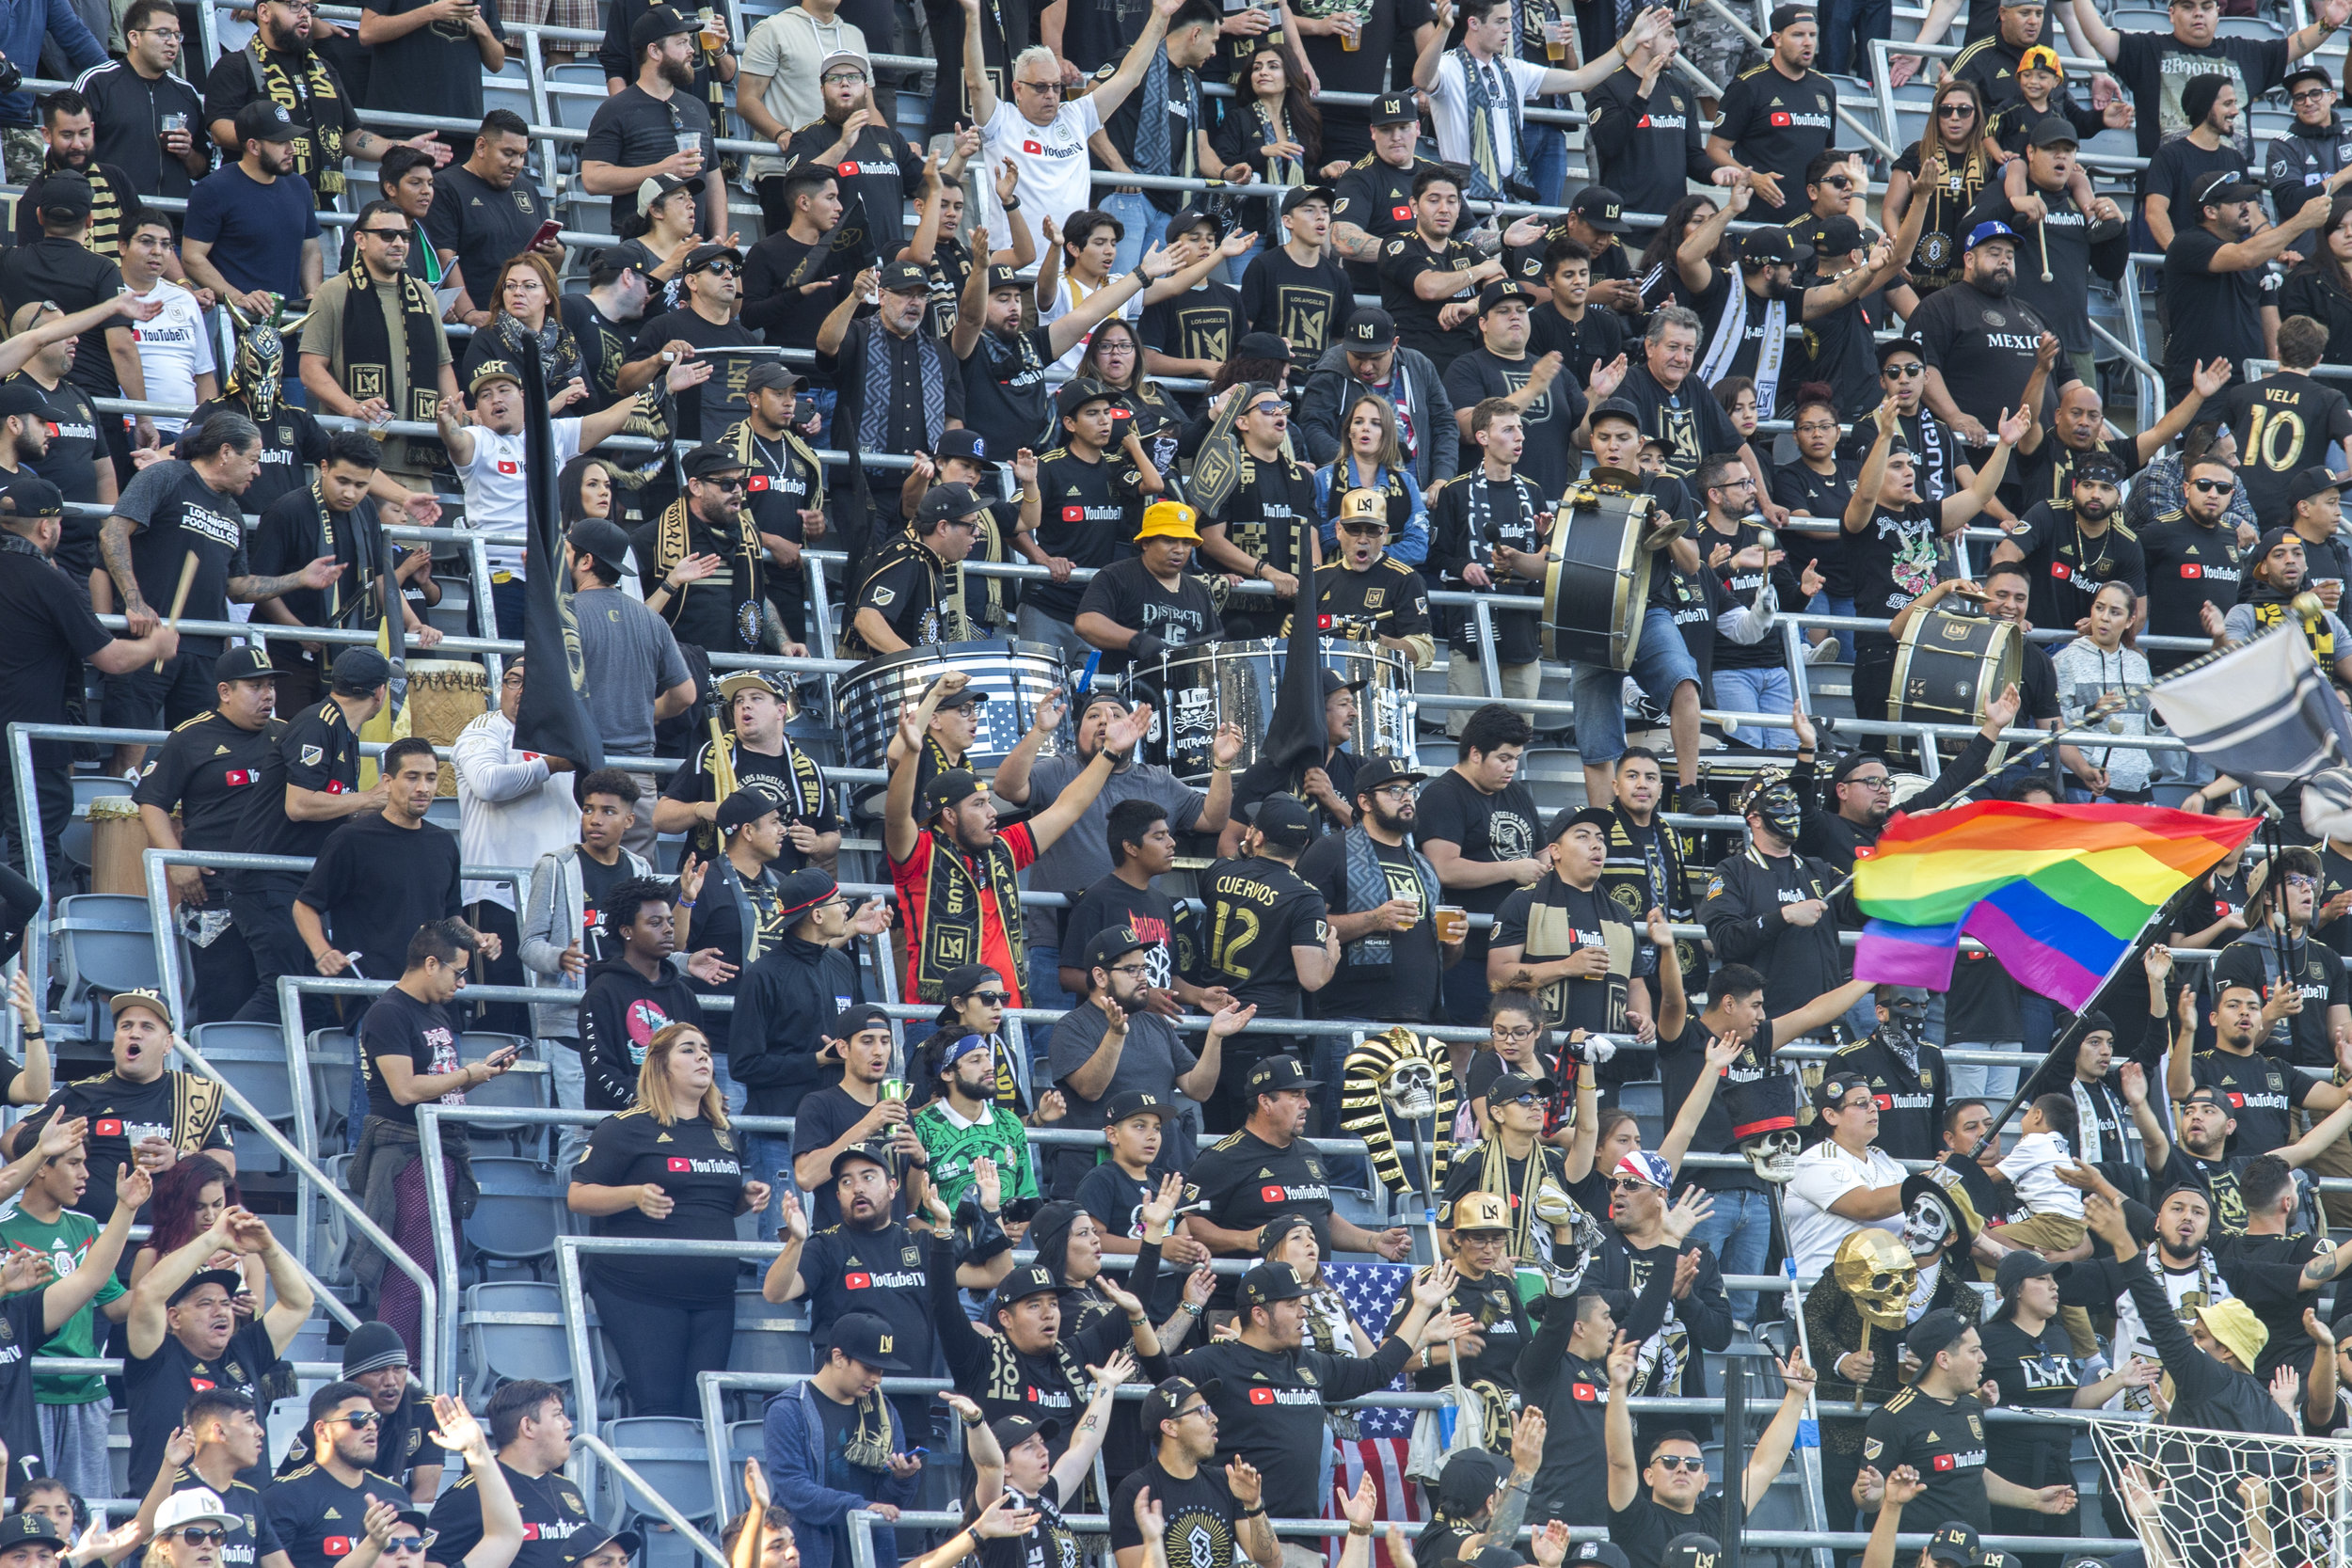  Fans cheer for the Los Angeles Football Club before their second home match of the season against the Minnesota United Football Club while sporting an LGBTQ flag. There was an incident in the teams first game where fans were shouting homophobic slur